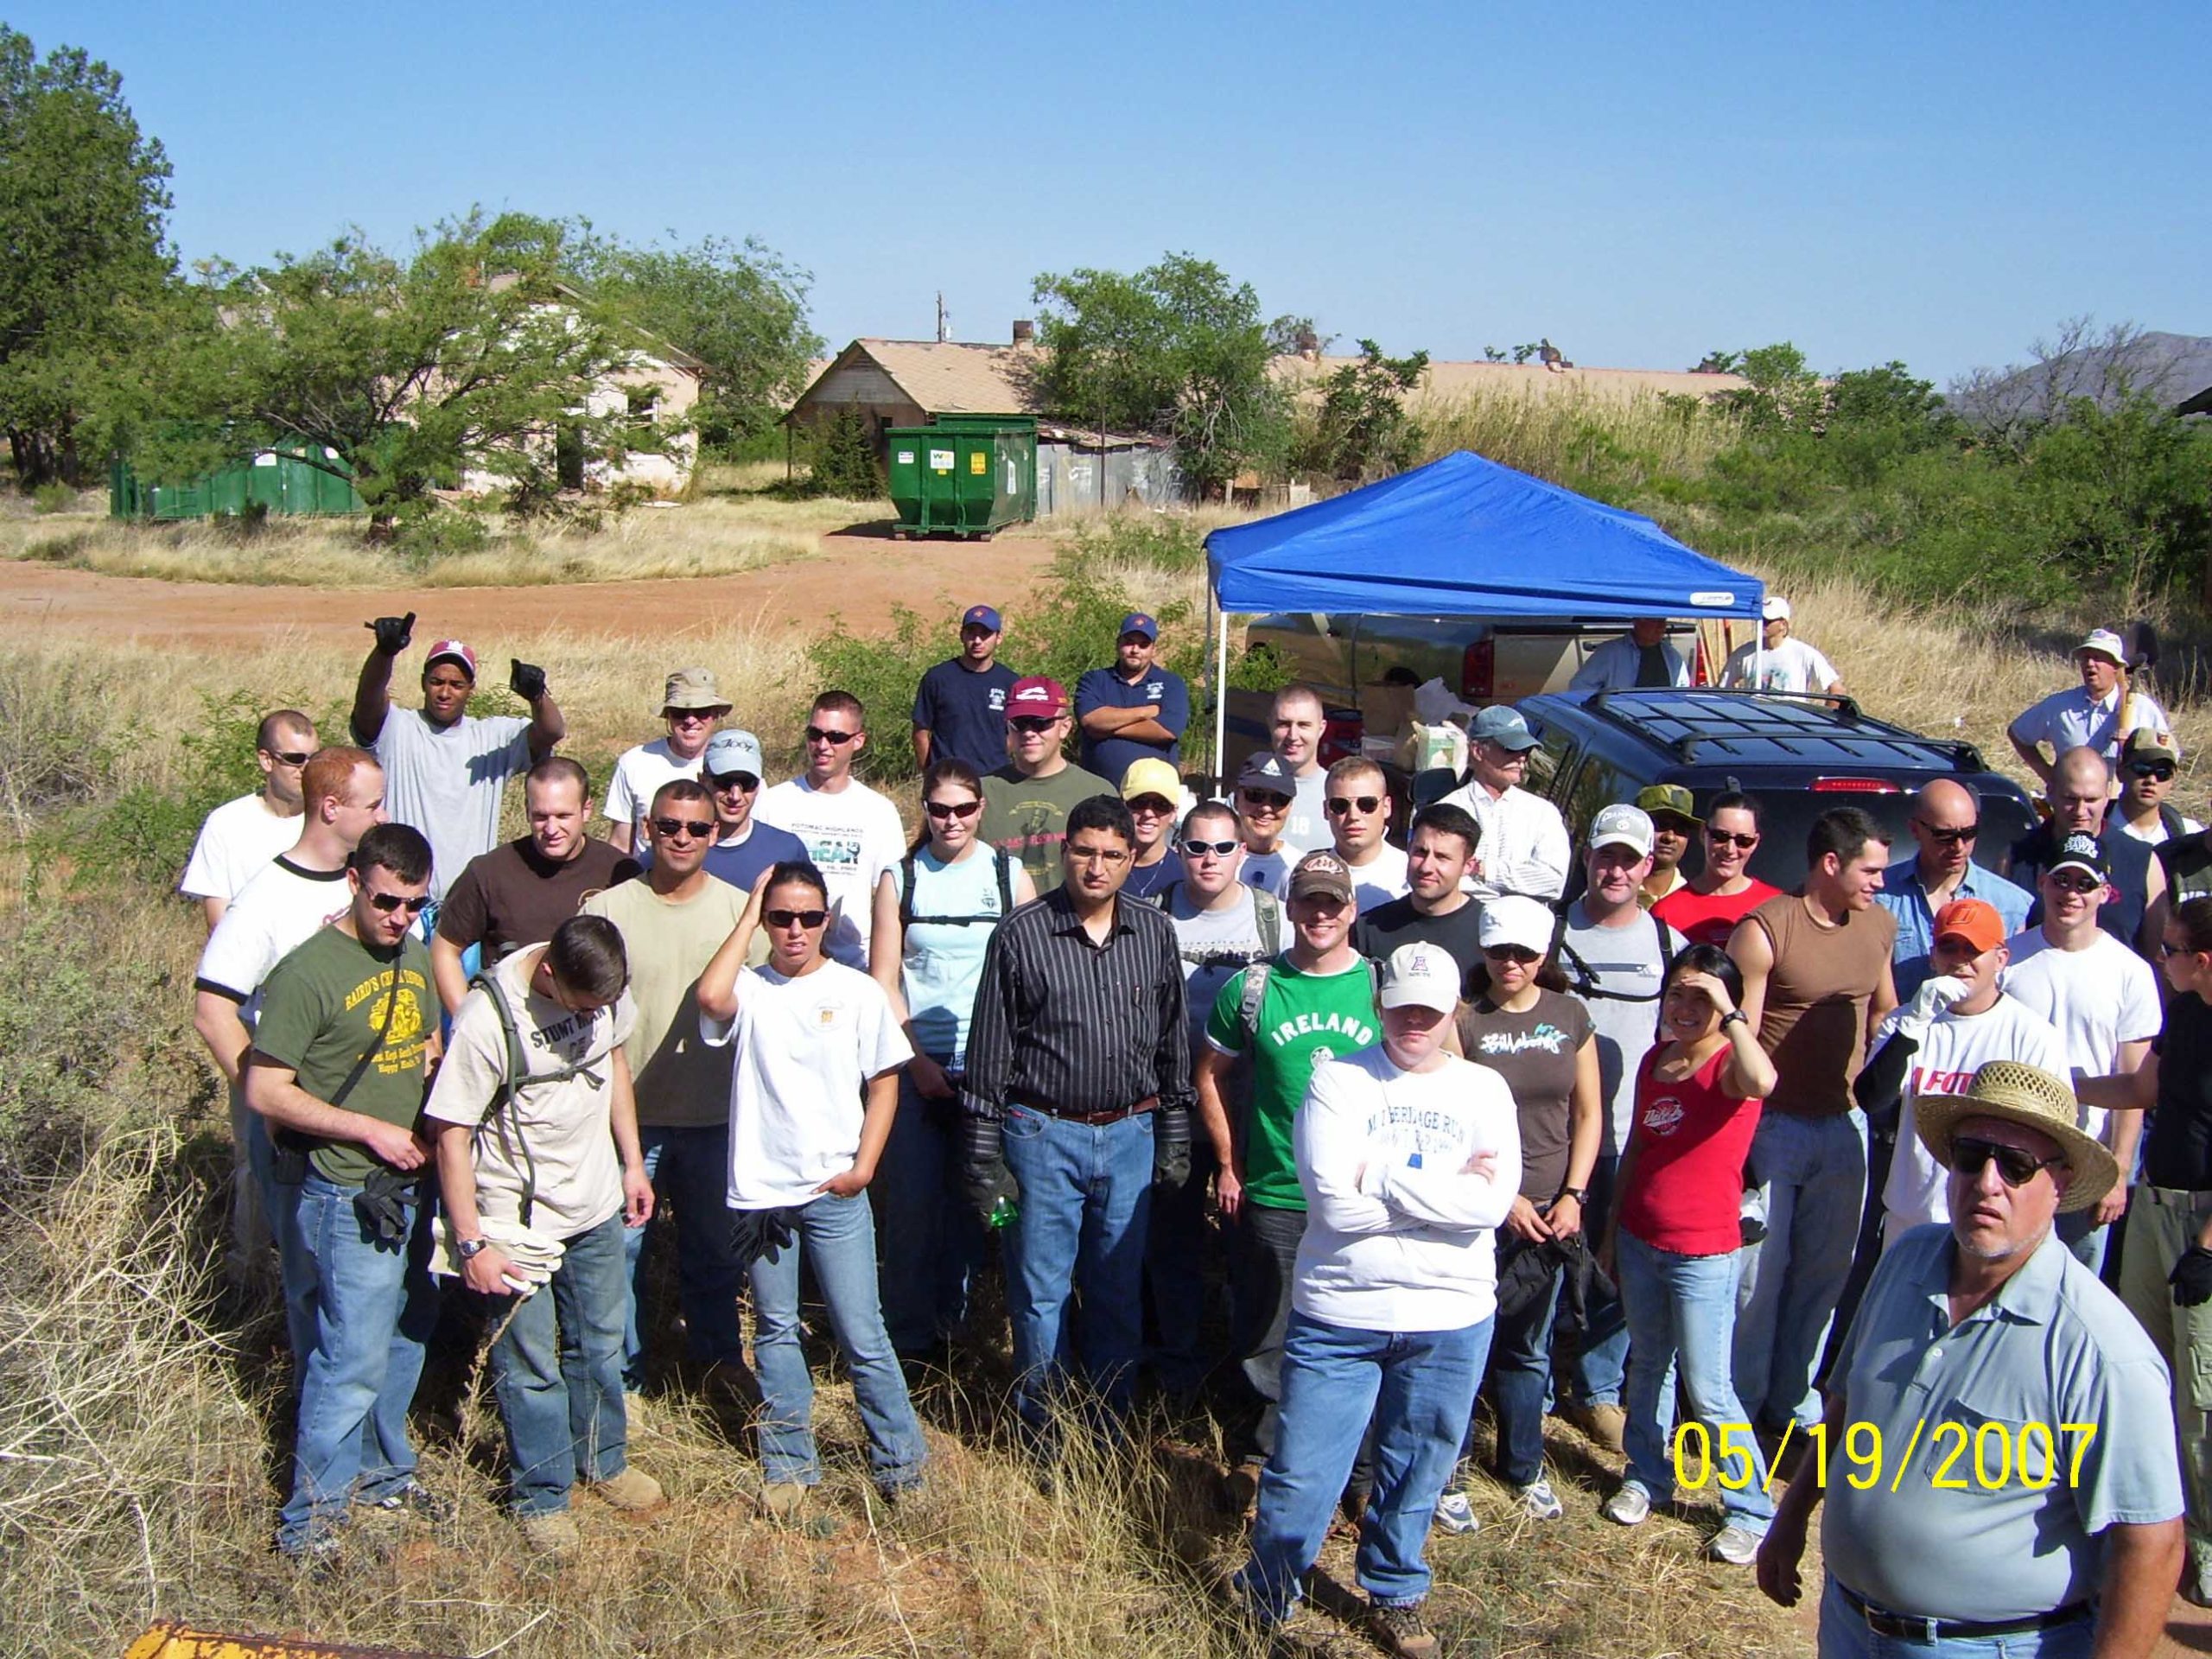 Servicepeople from Ft. Huachuca volunteered for one of the first cleanup days at the Camp.